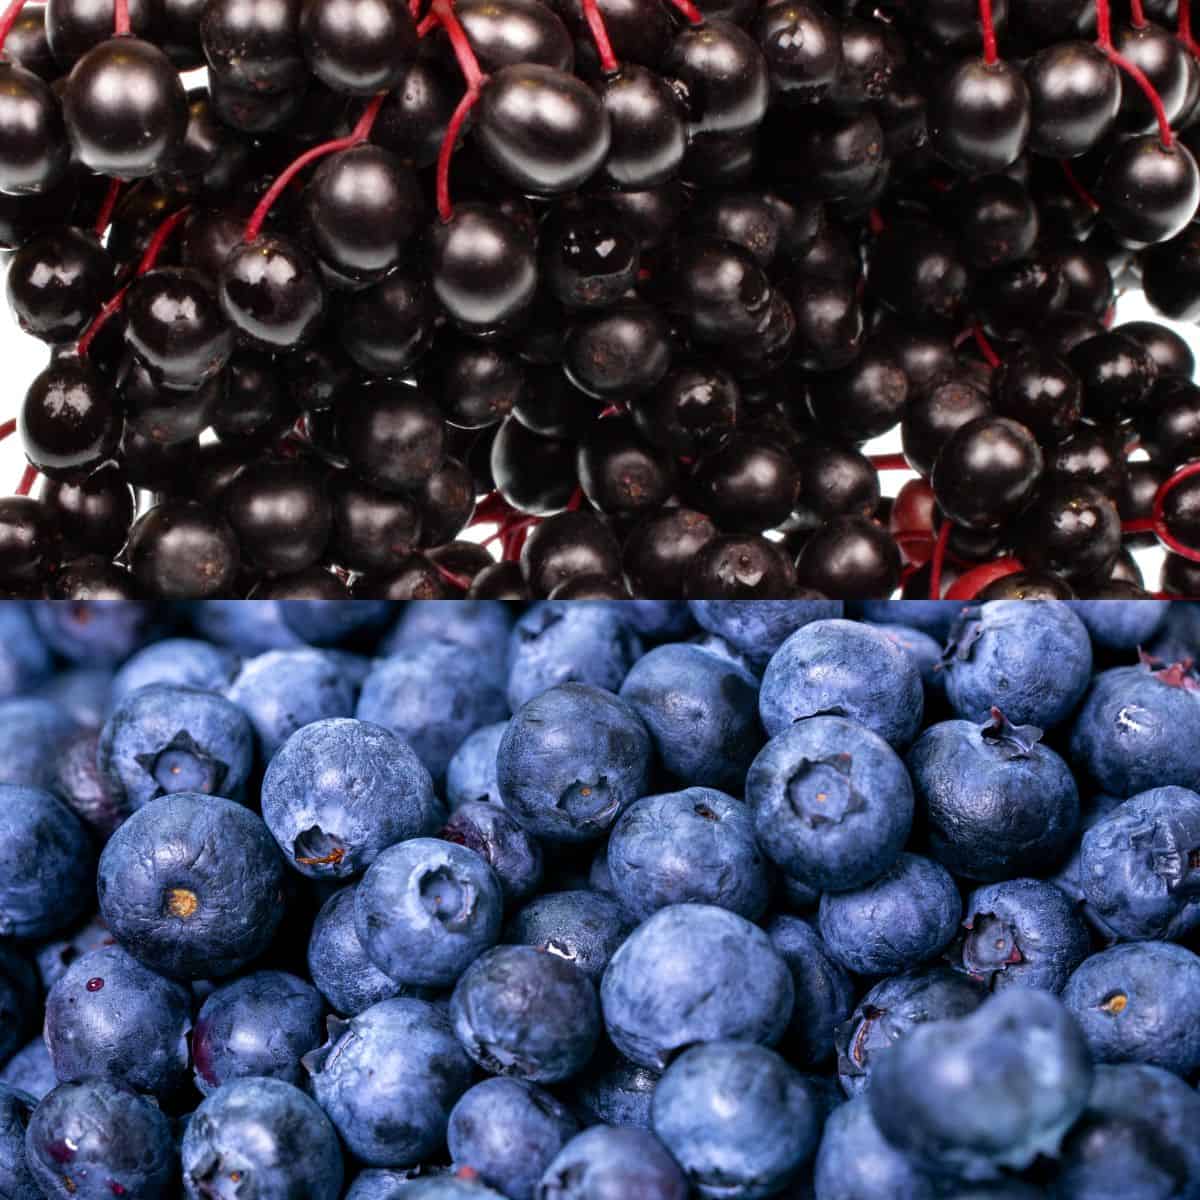 Two photos one spliced on top of the other. on top is a close up of dark purple elderberries and the bottom Is a bunch of blueberries.